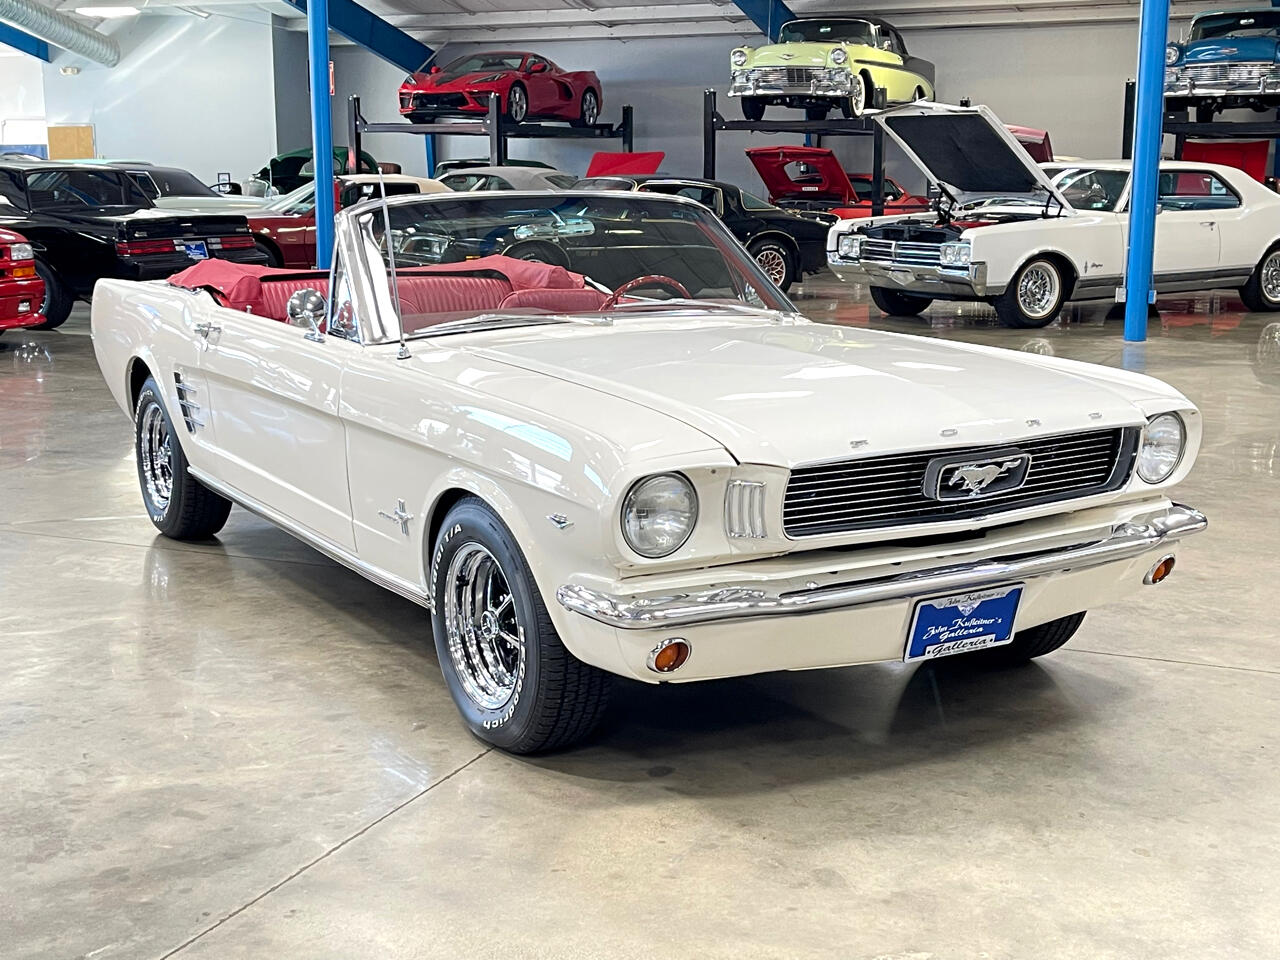 Ford Mustang Convertible 1966